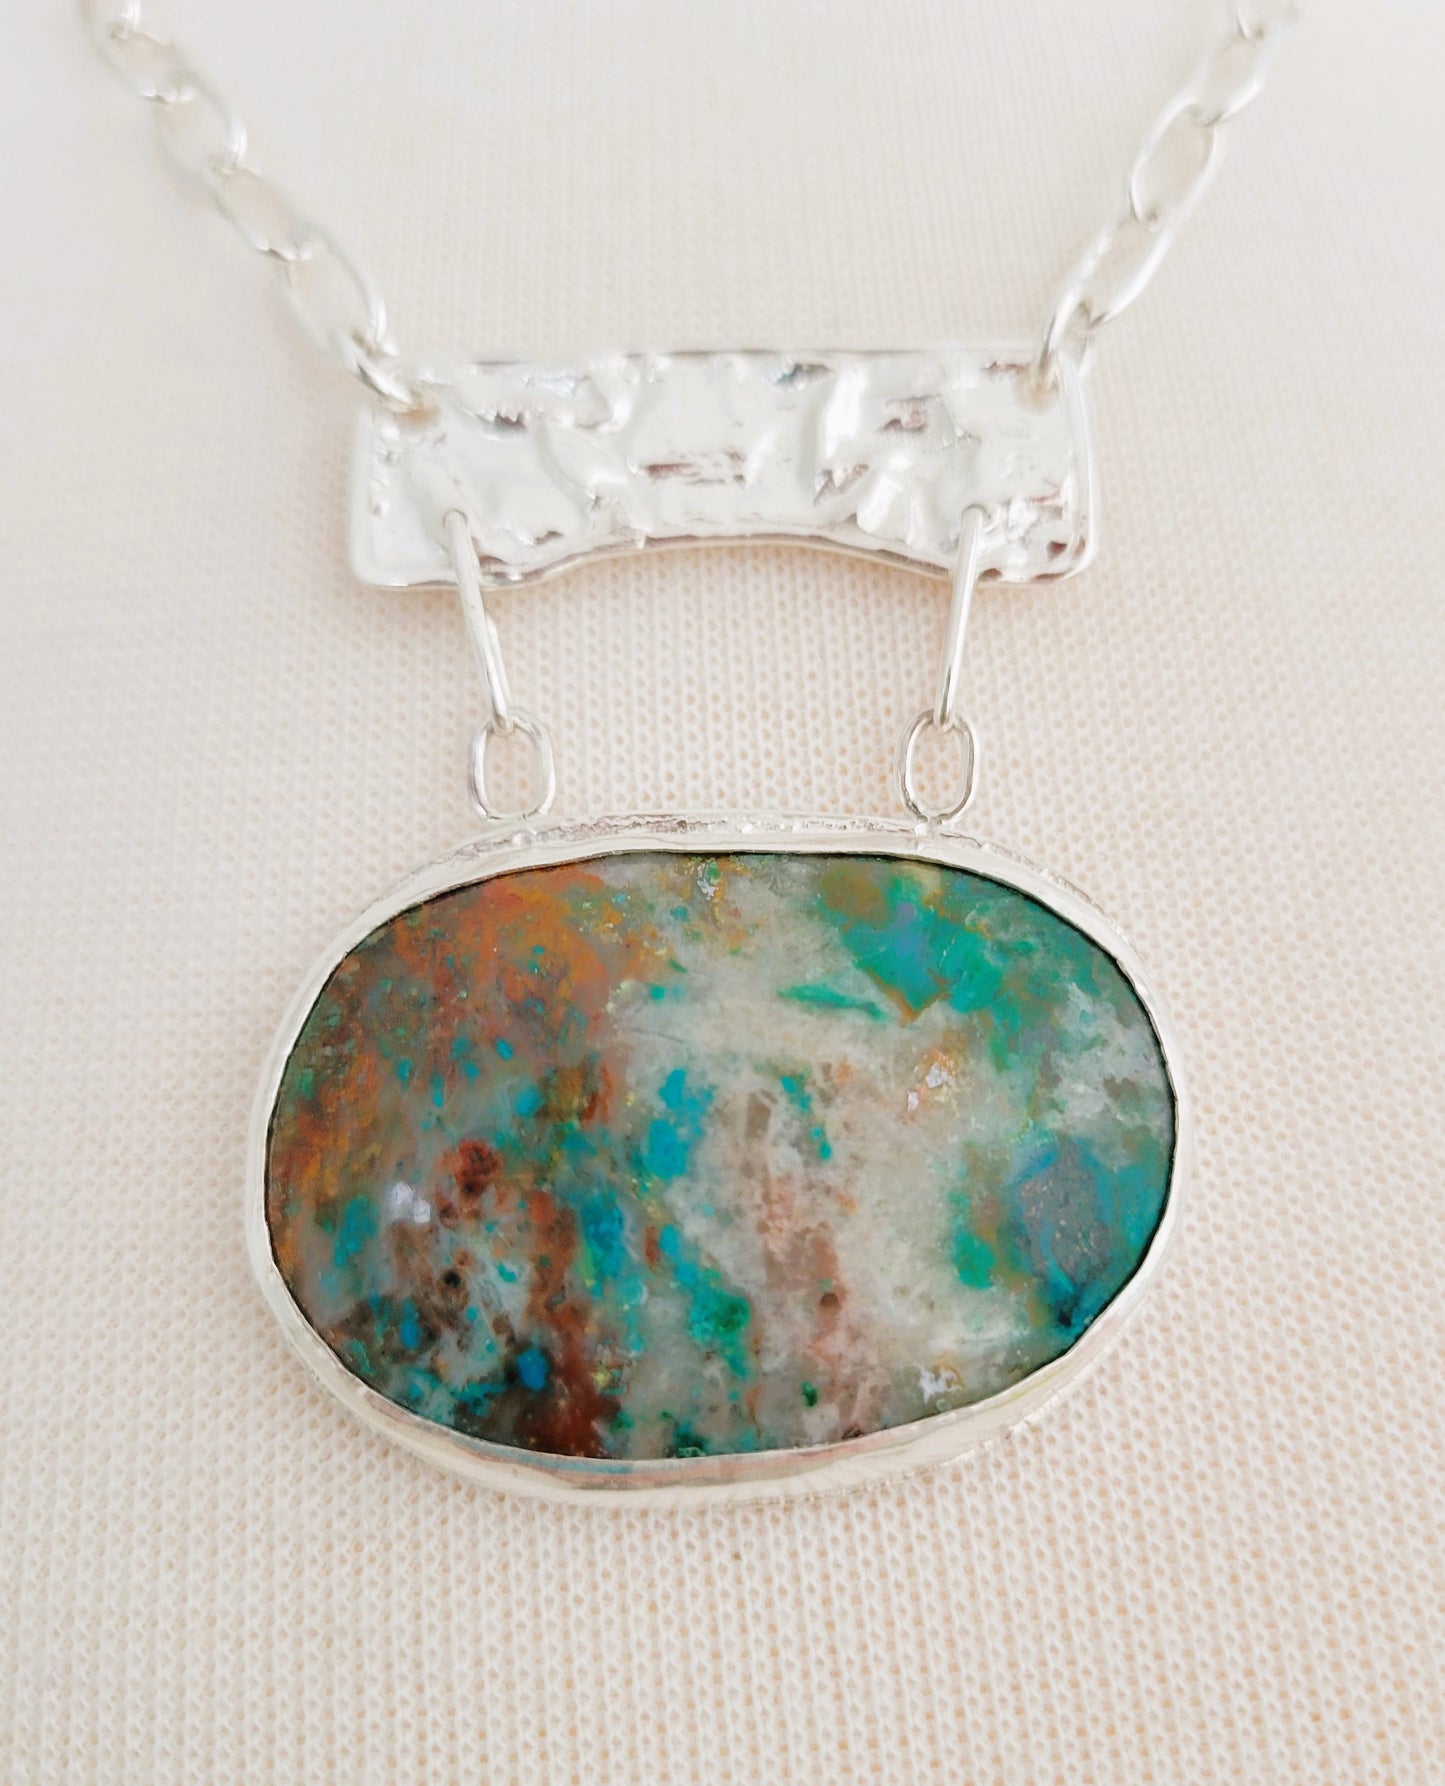 Necklace with Chrysocolla Stone